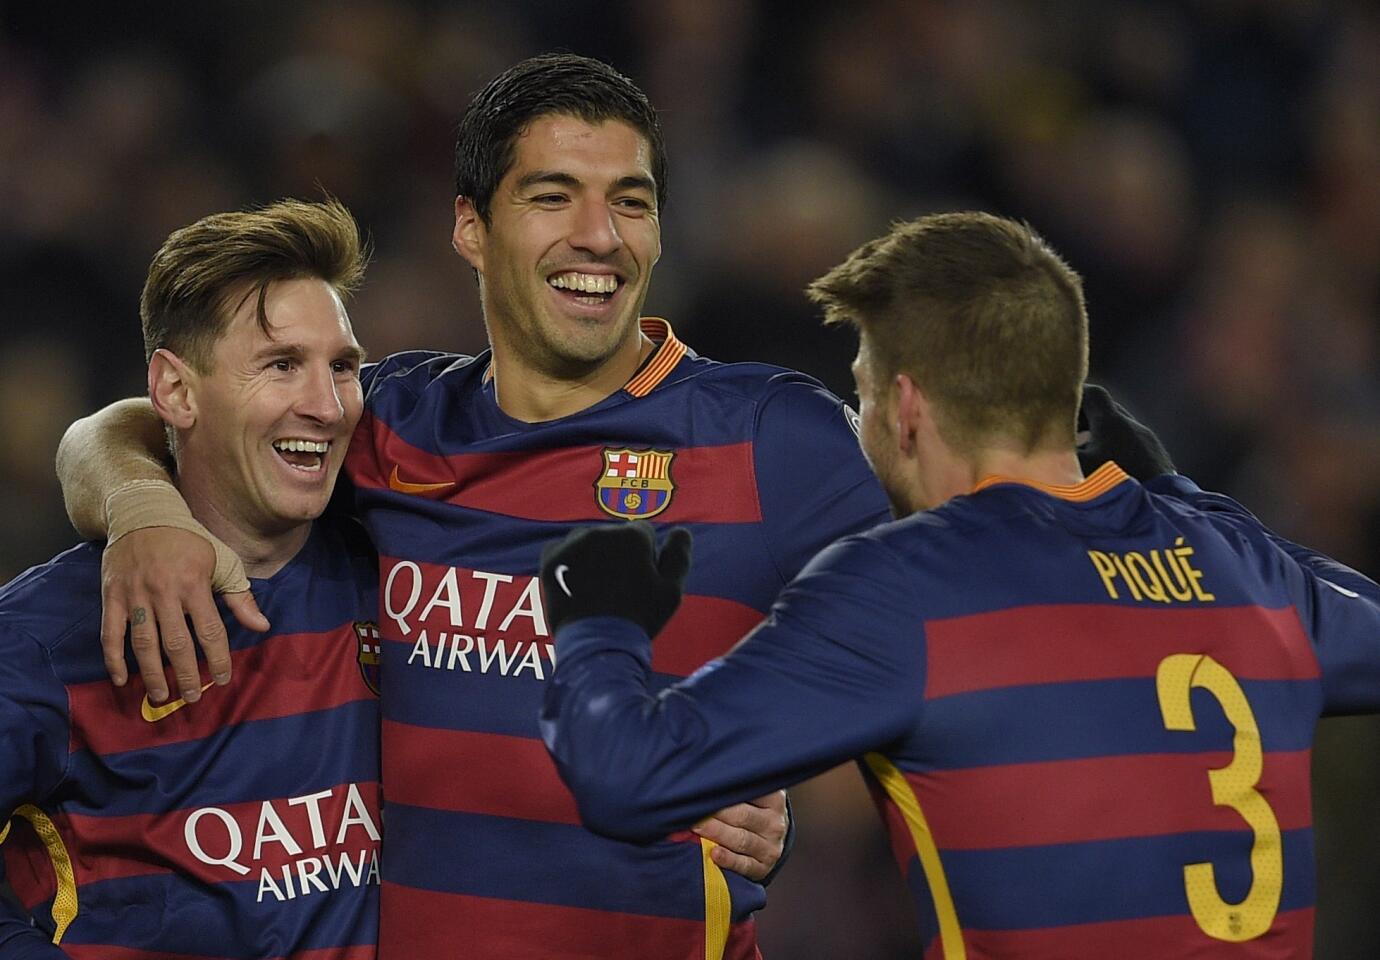 Barcelona's defender Gerard Pique (R) celebrates with Barcelona's Argentinian forward Lionel Messi (L) and Barcelona's Uruguayan forward Luis Suarez after scoring during the UEFA Champions League Group E football match FC Barcelona vs AS Roma at the Camp Nou stadium in Barcelona on November 24, 2015.